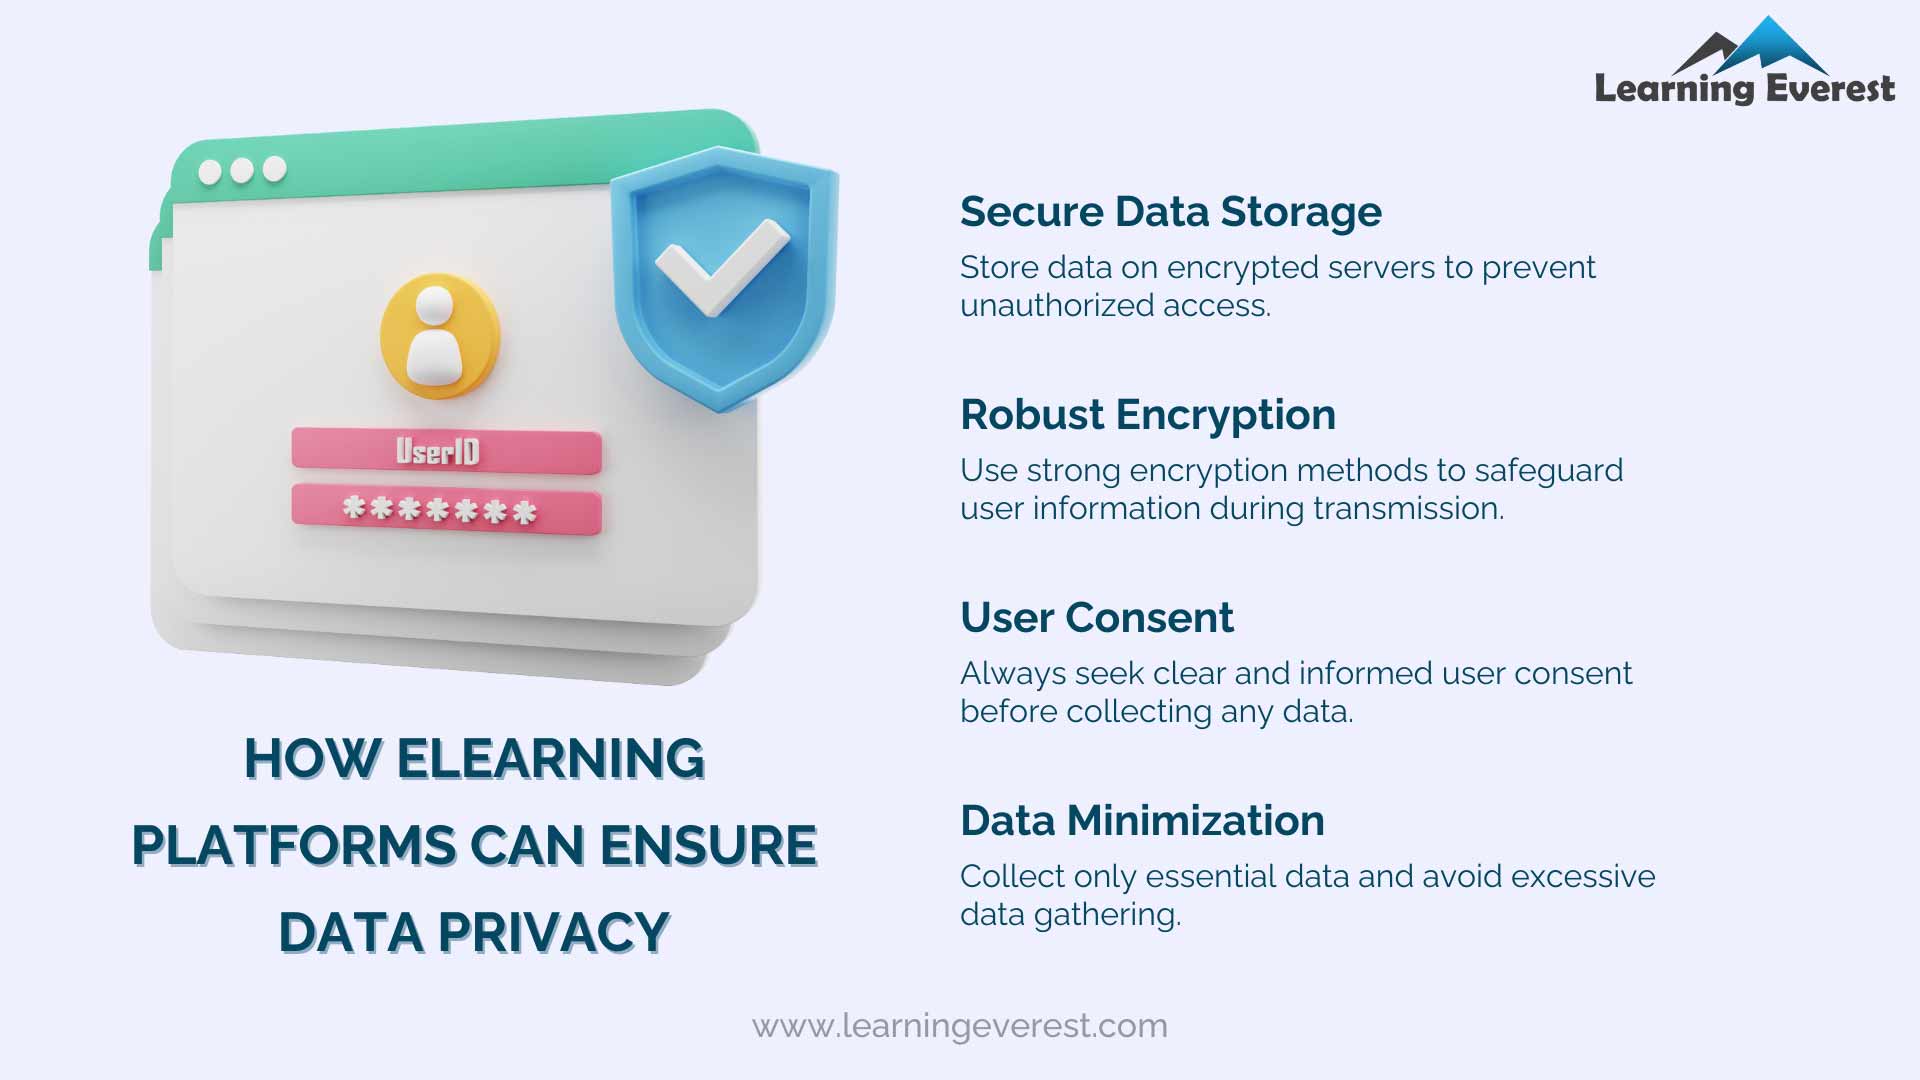 Requirements for eLearning - Security and Data Privacy